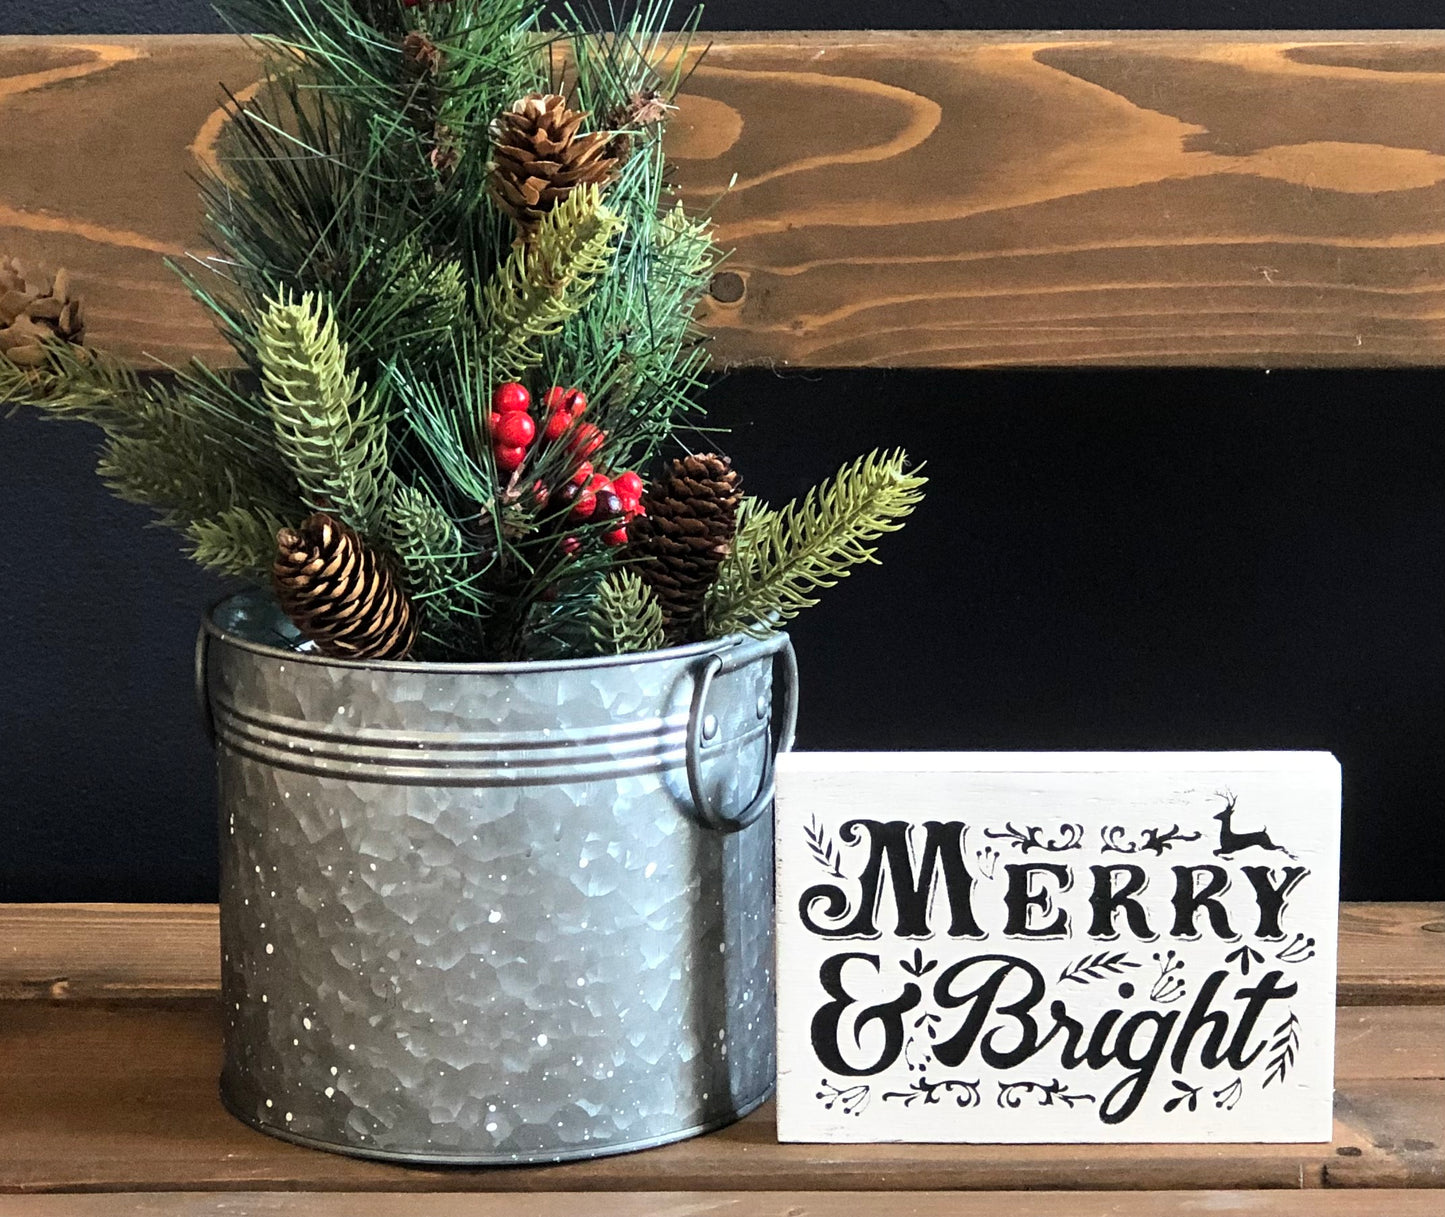 "Merry and bright" wood sign